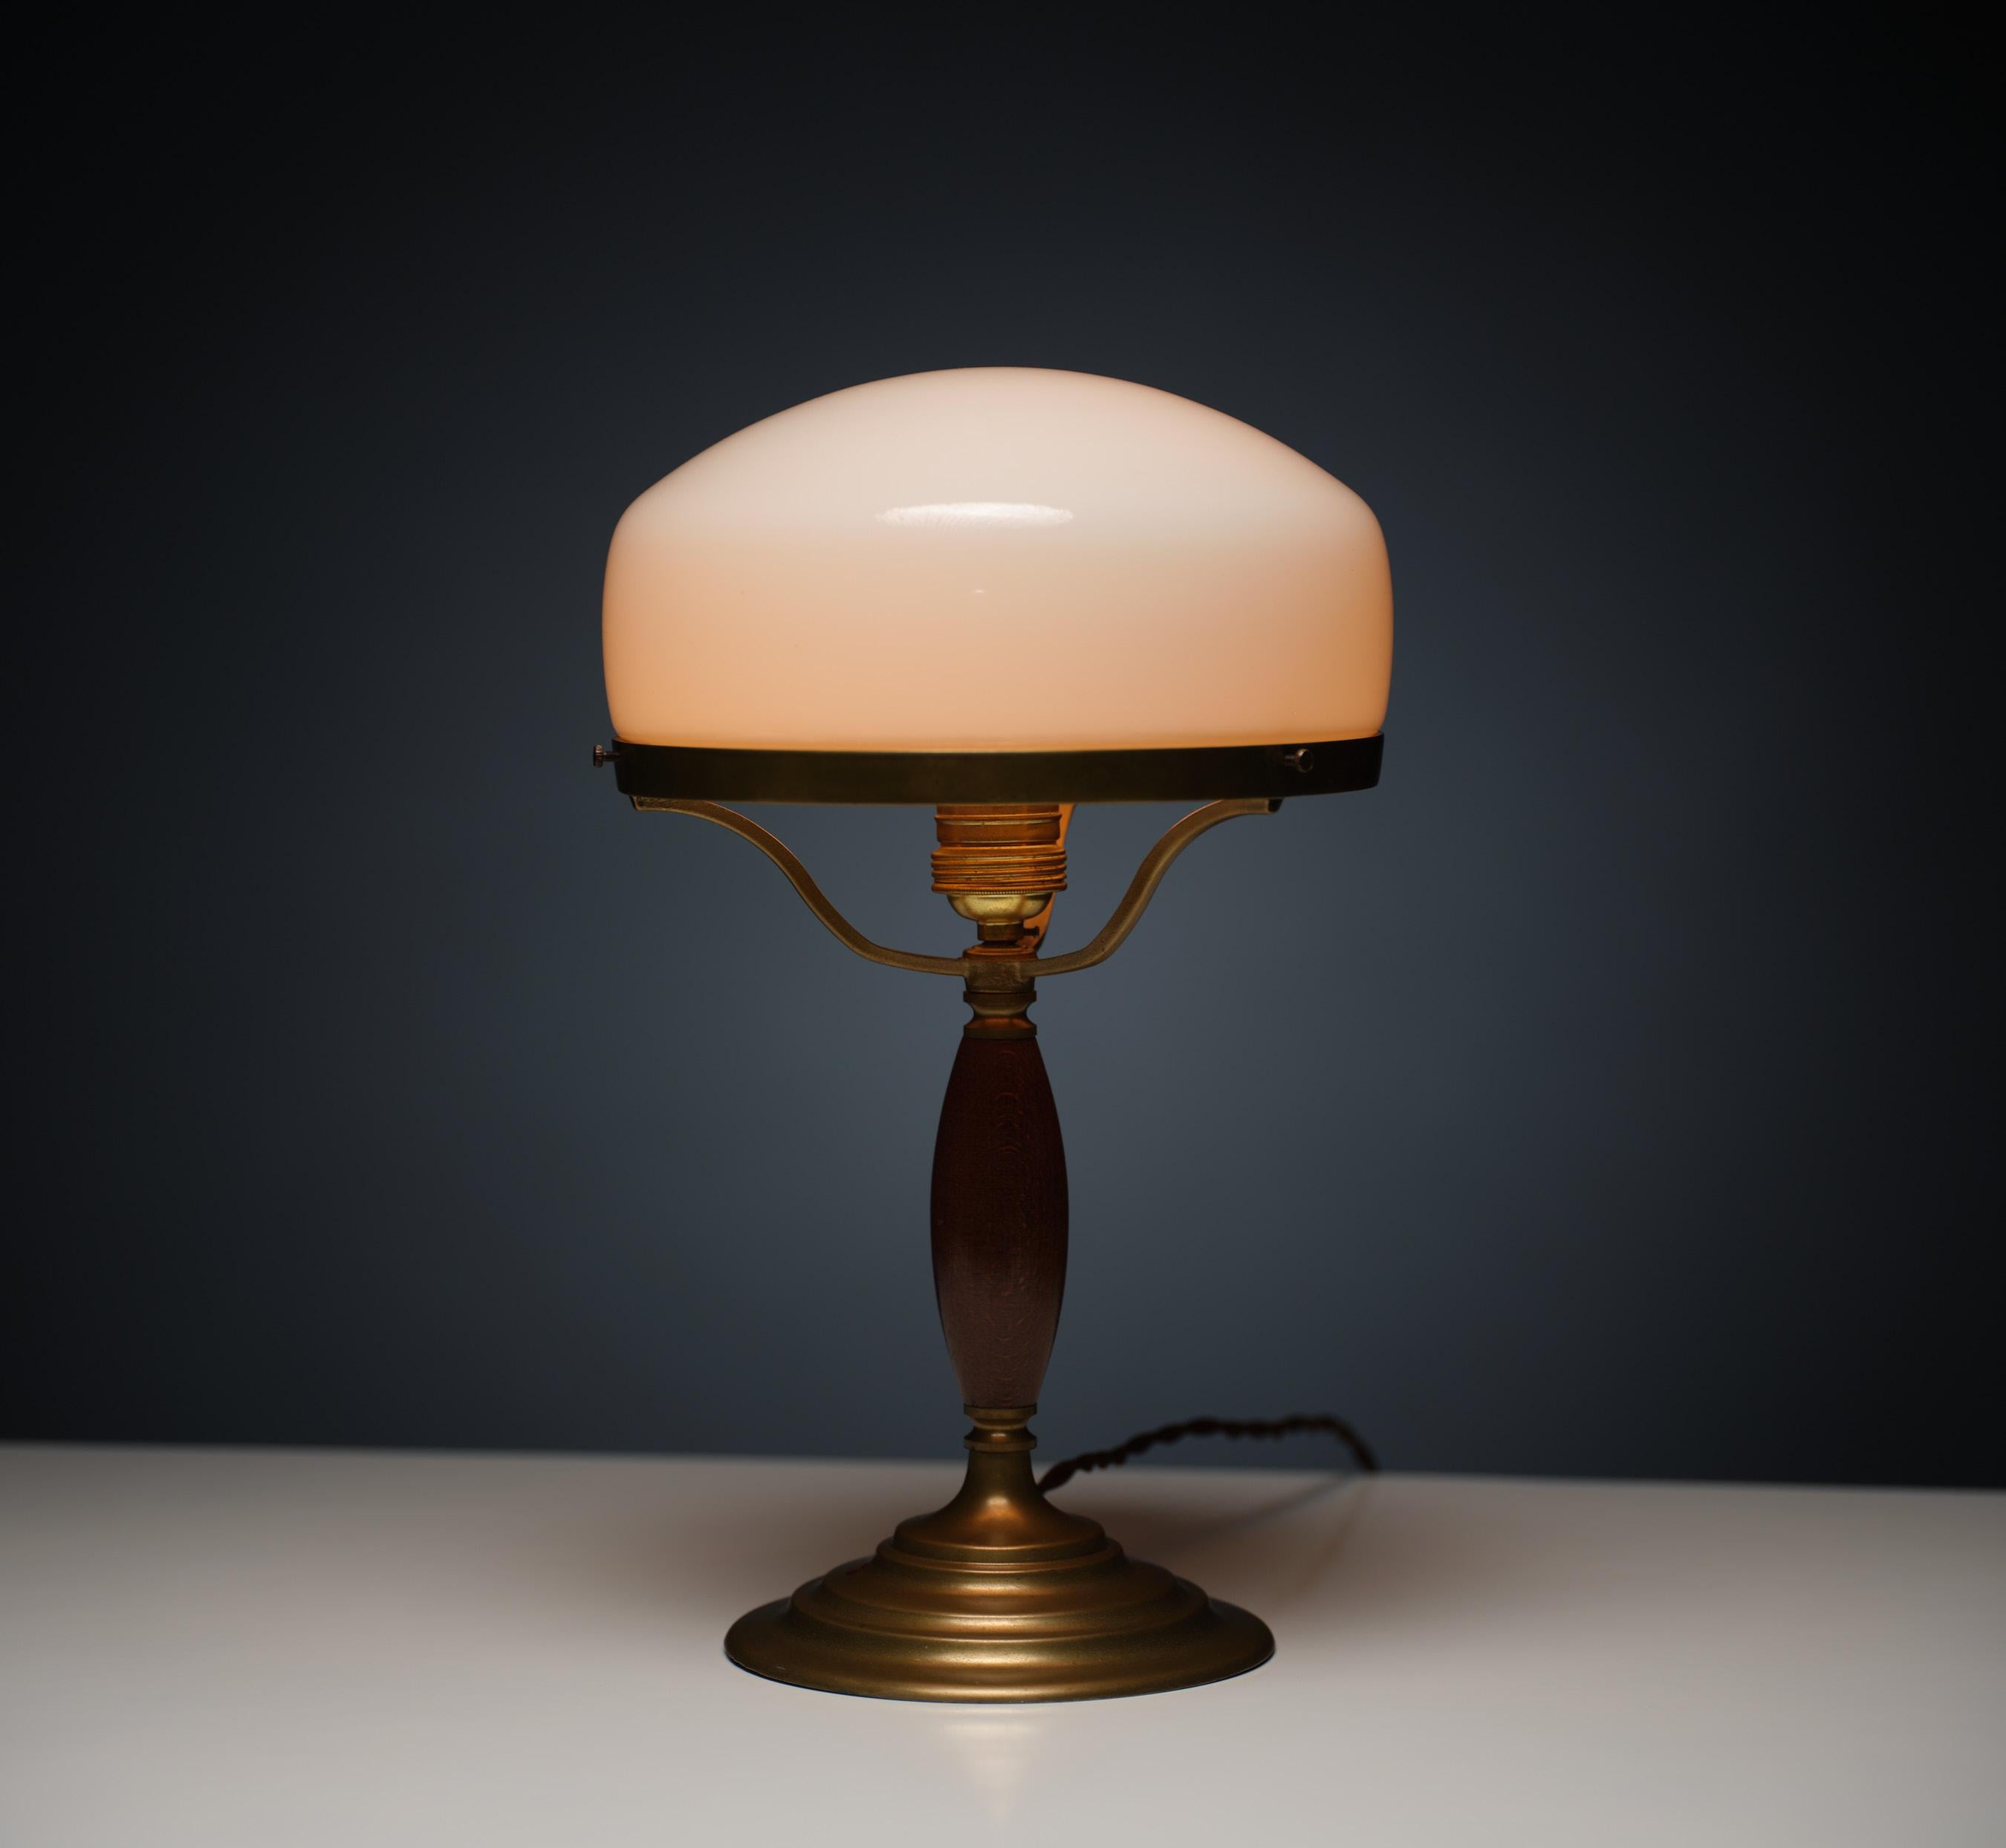 Elegant Midcentury Vintage Table Lamp - Brass Beauty with Original Patina For Sale 1